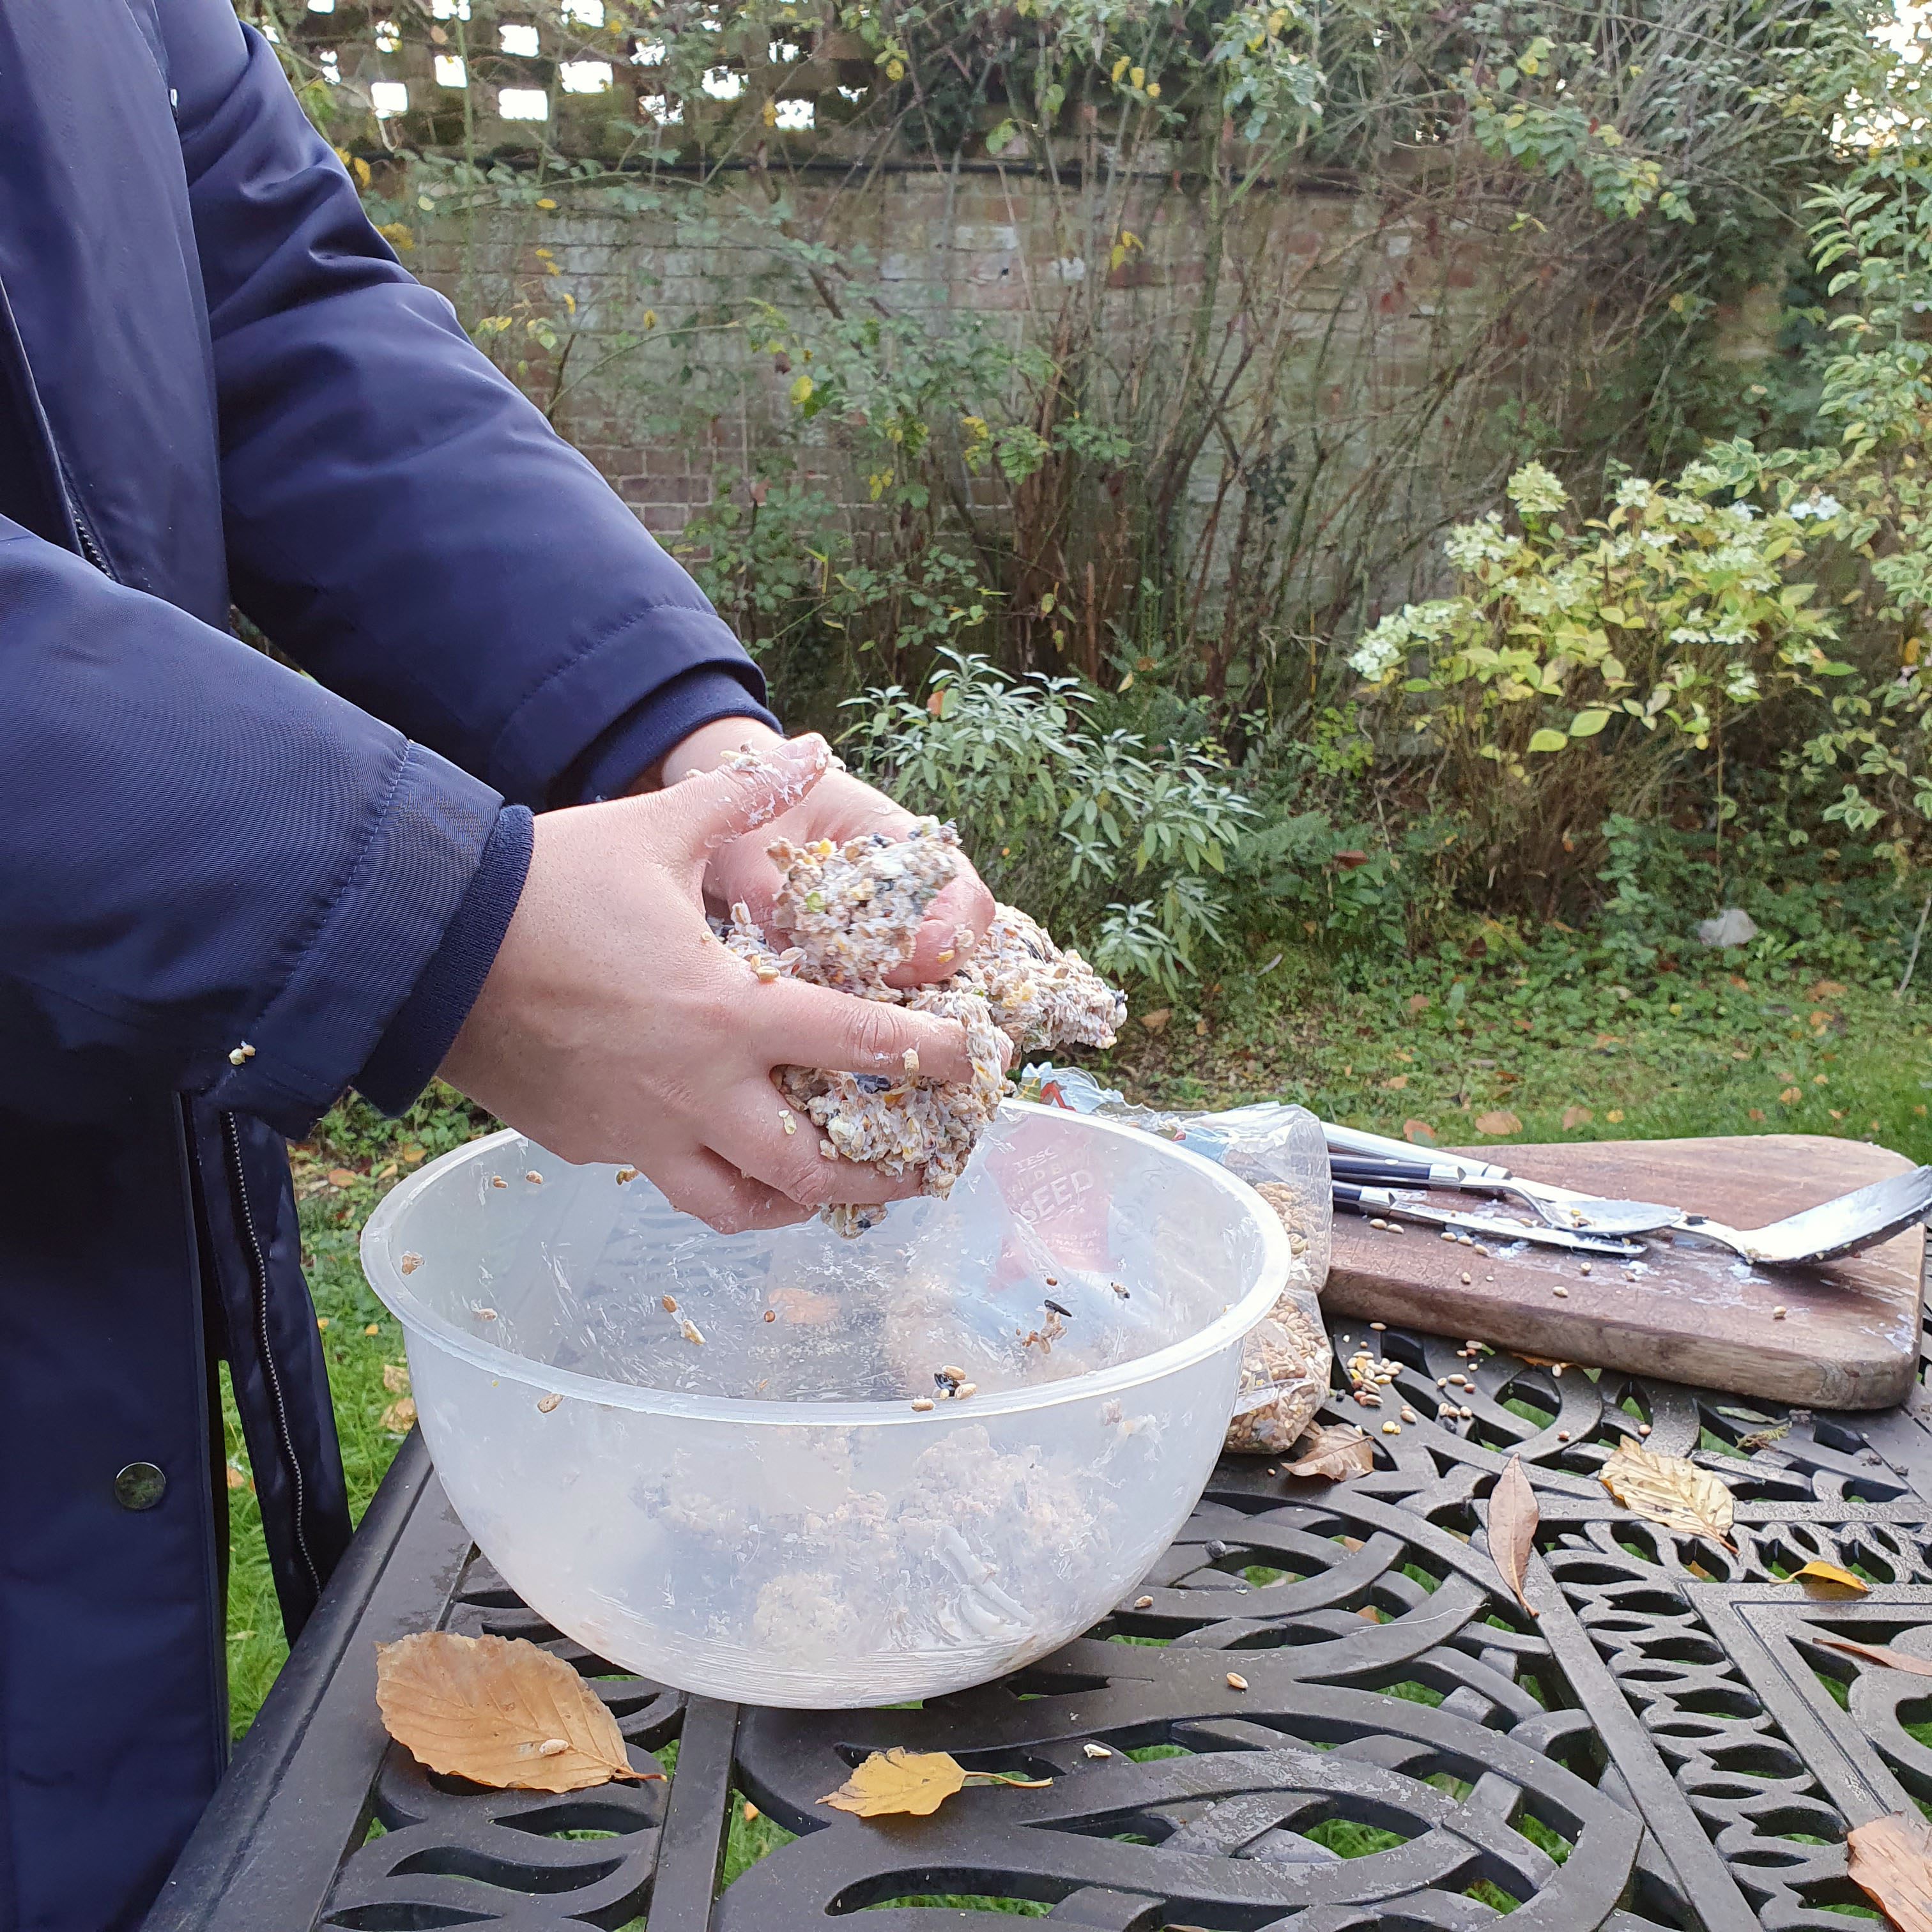 Mixing and forming seed cakes by hand